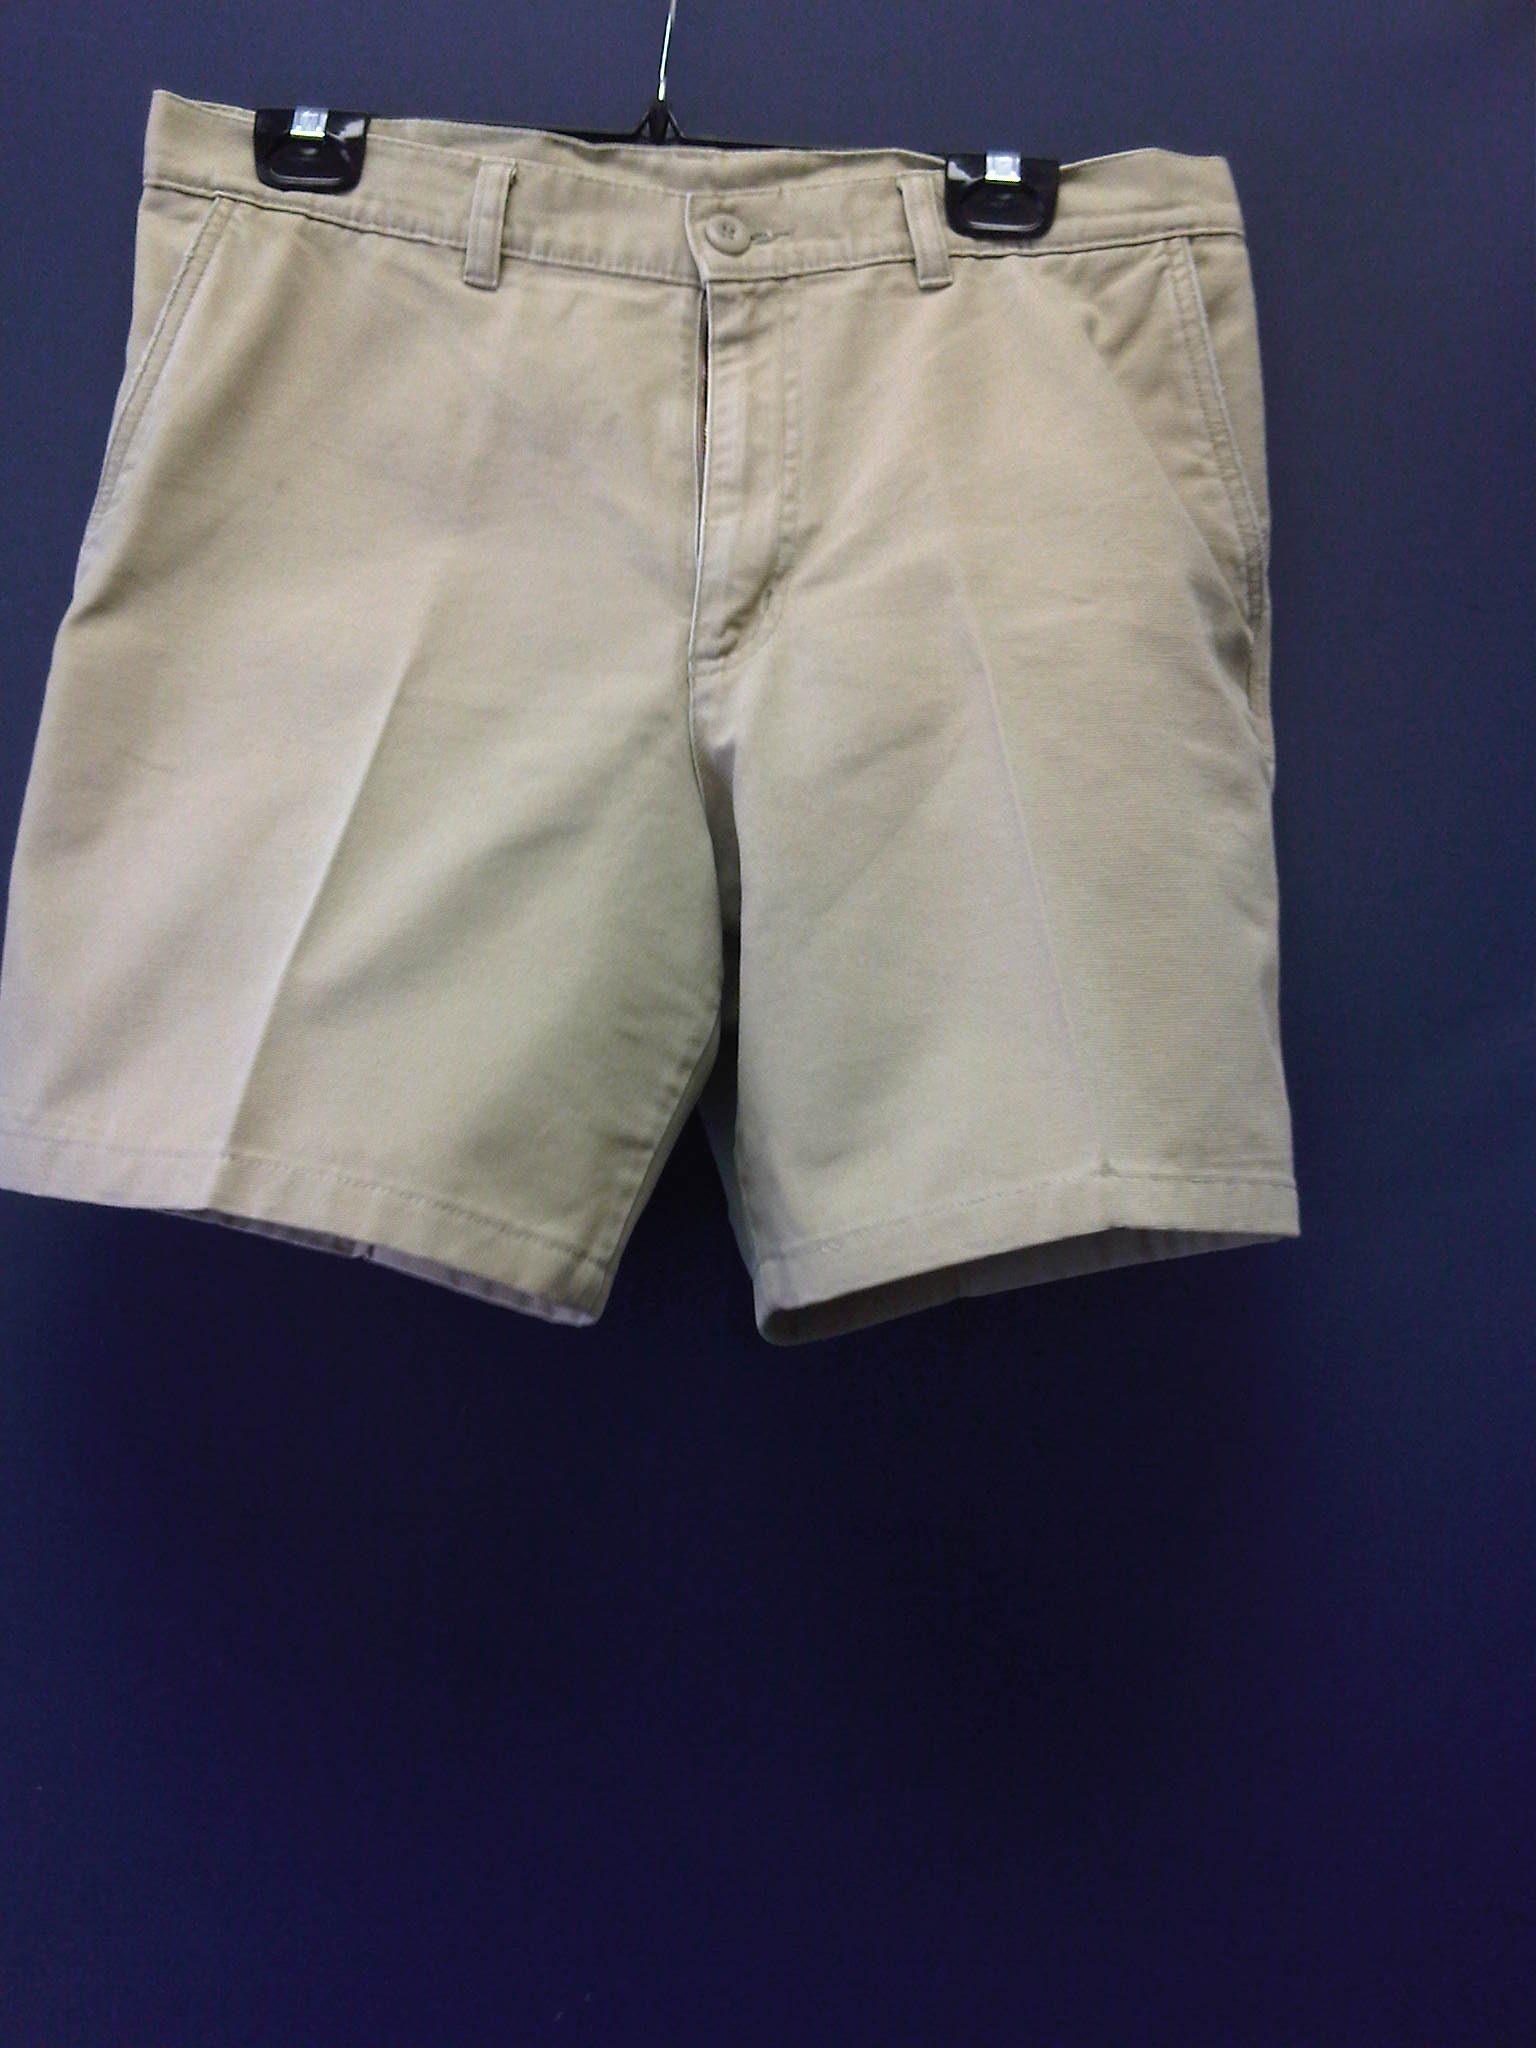 Turning pants into shorts | Parkers Dry Cleaning